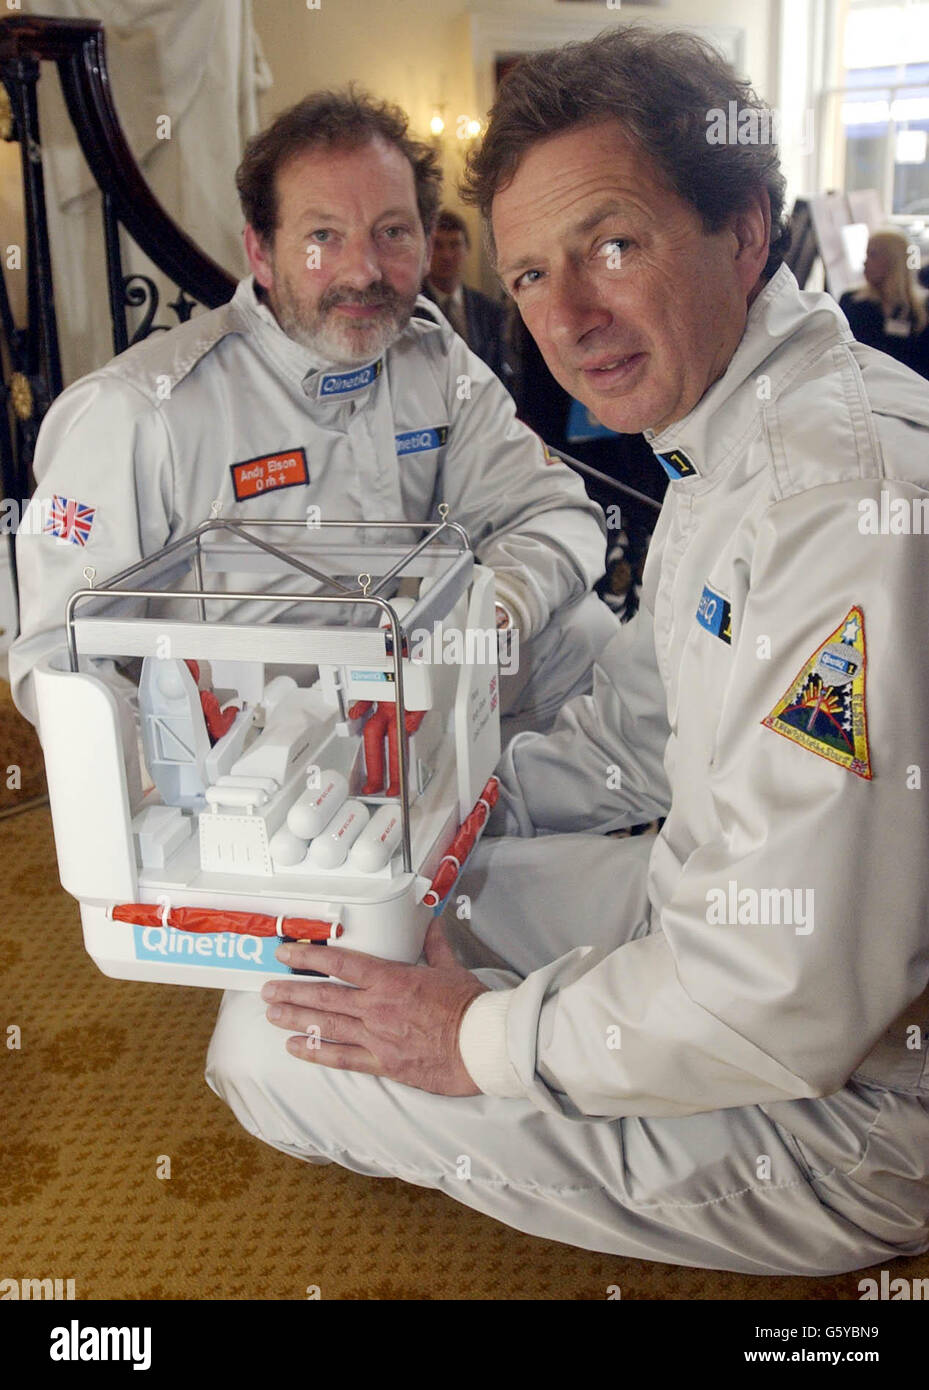 Ballonists Andy Elson (left) and Colin Prescot pose with a model of the cockpit from their balloon at the Royal Institute in London. * The two British pilots who plan to break the world altitude record for a manned balloon flight today began examining weather data for a 72-hour window to enable them to launch their balloon QinetiQ1 before hopefully soaring 25 miles (132,000ft) high. See PA story ADVENTURE Balloon. PA Photo: Chris Young Stock Photo